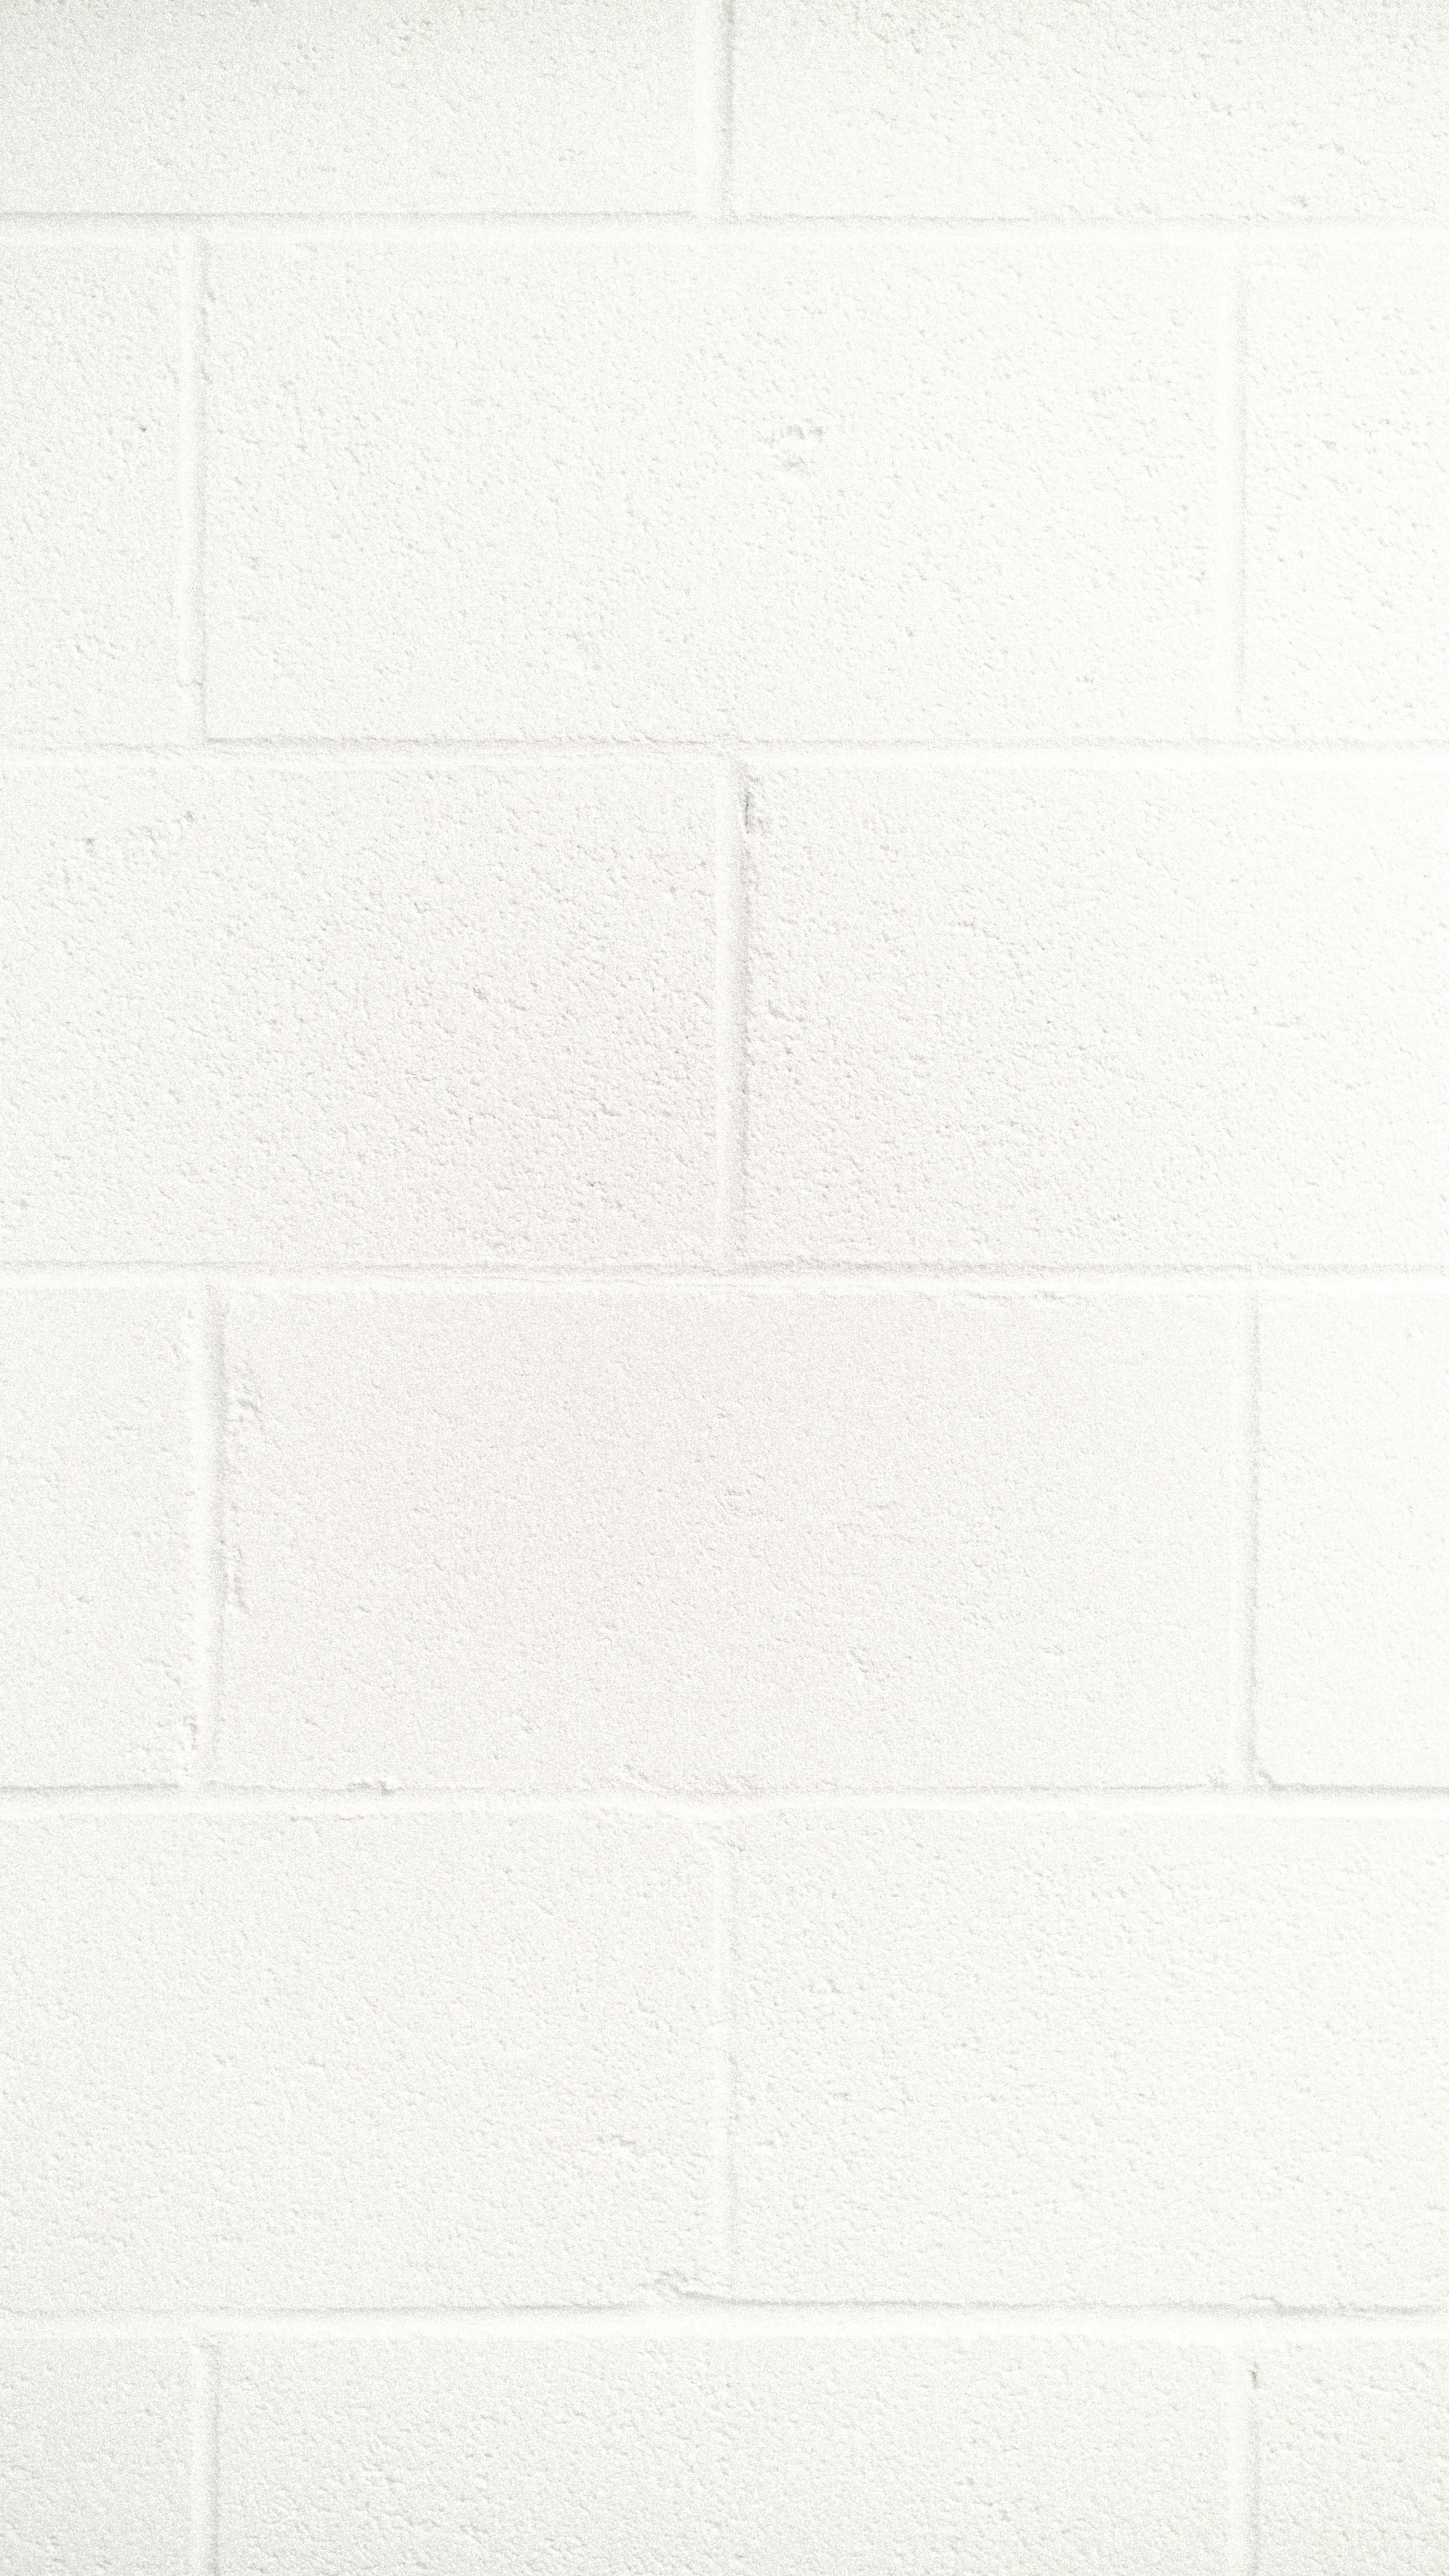 I needed a photo of white brick. But I couldn’t find any. So I took one, and here it is.